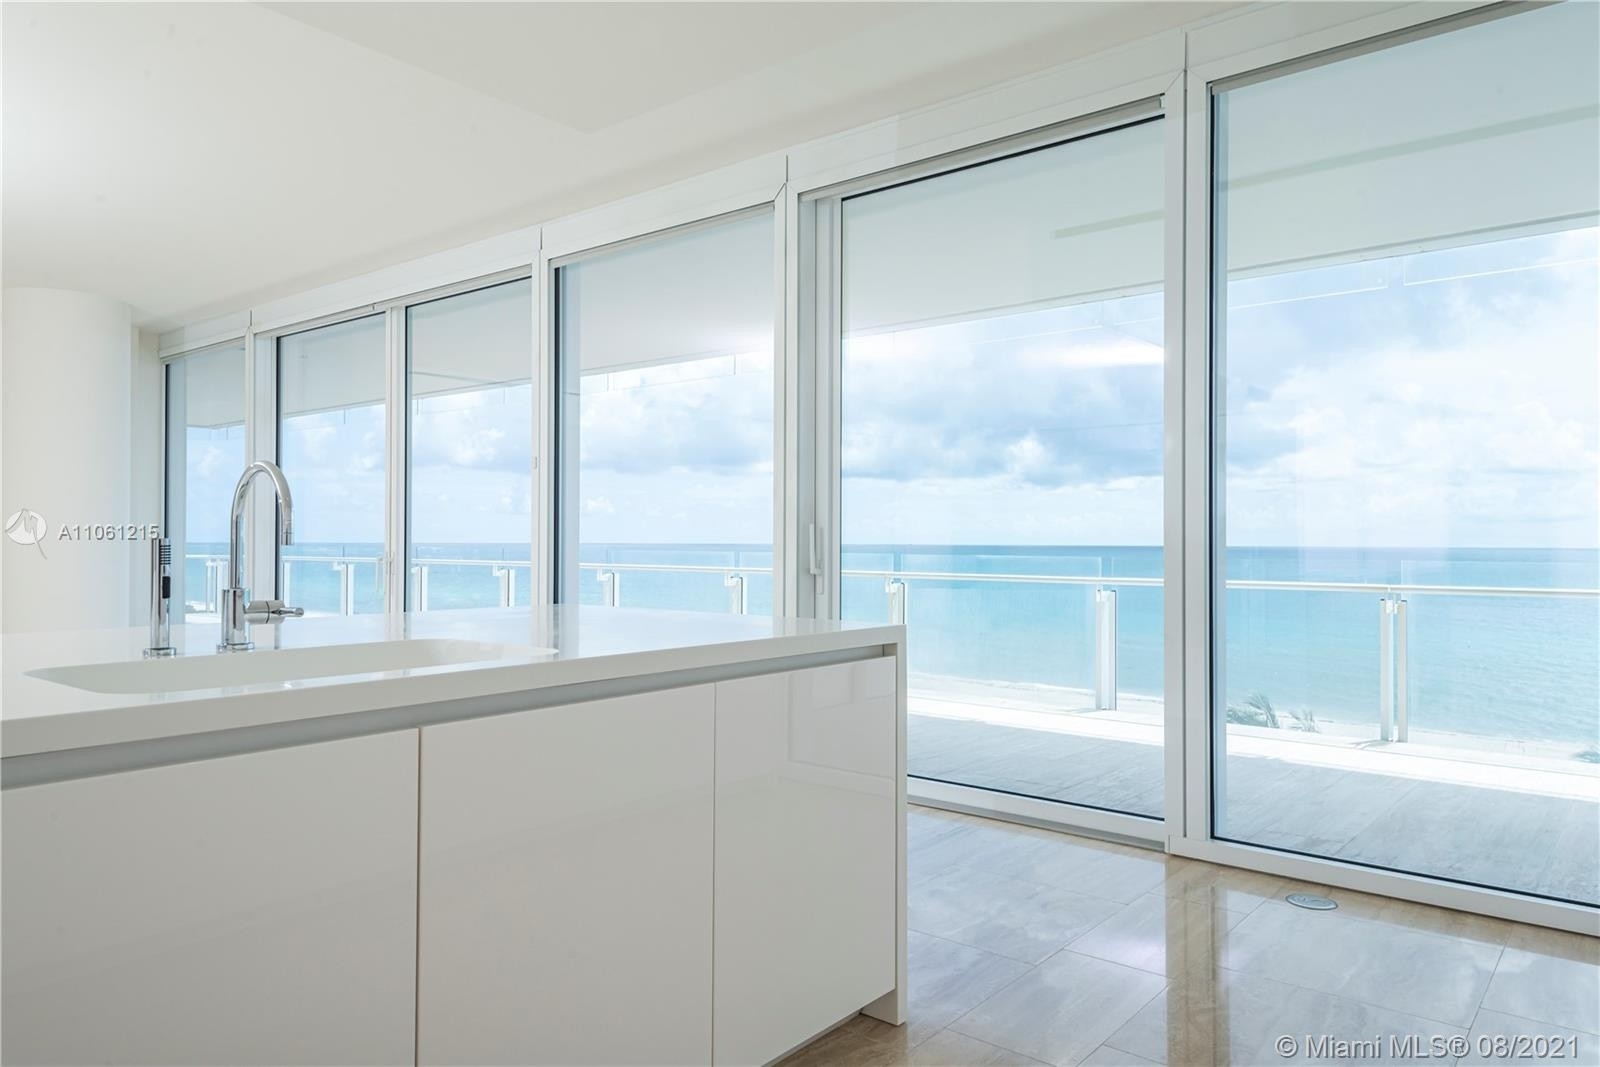 11. Condominiums at 9111 Collins Ave, N-521 Surfside